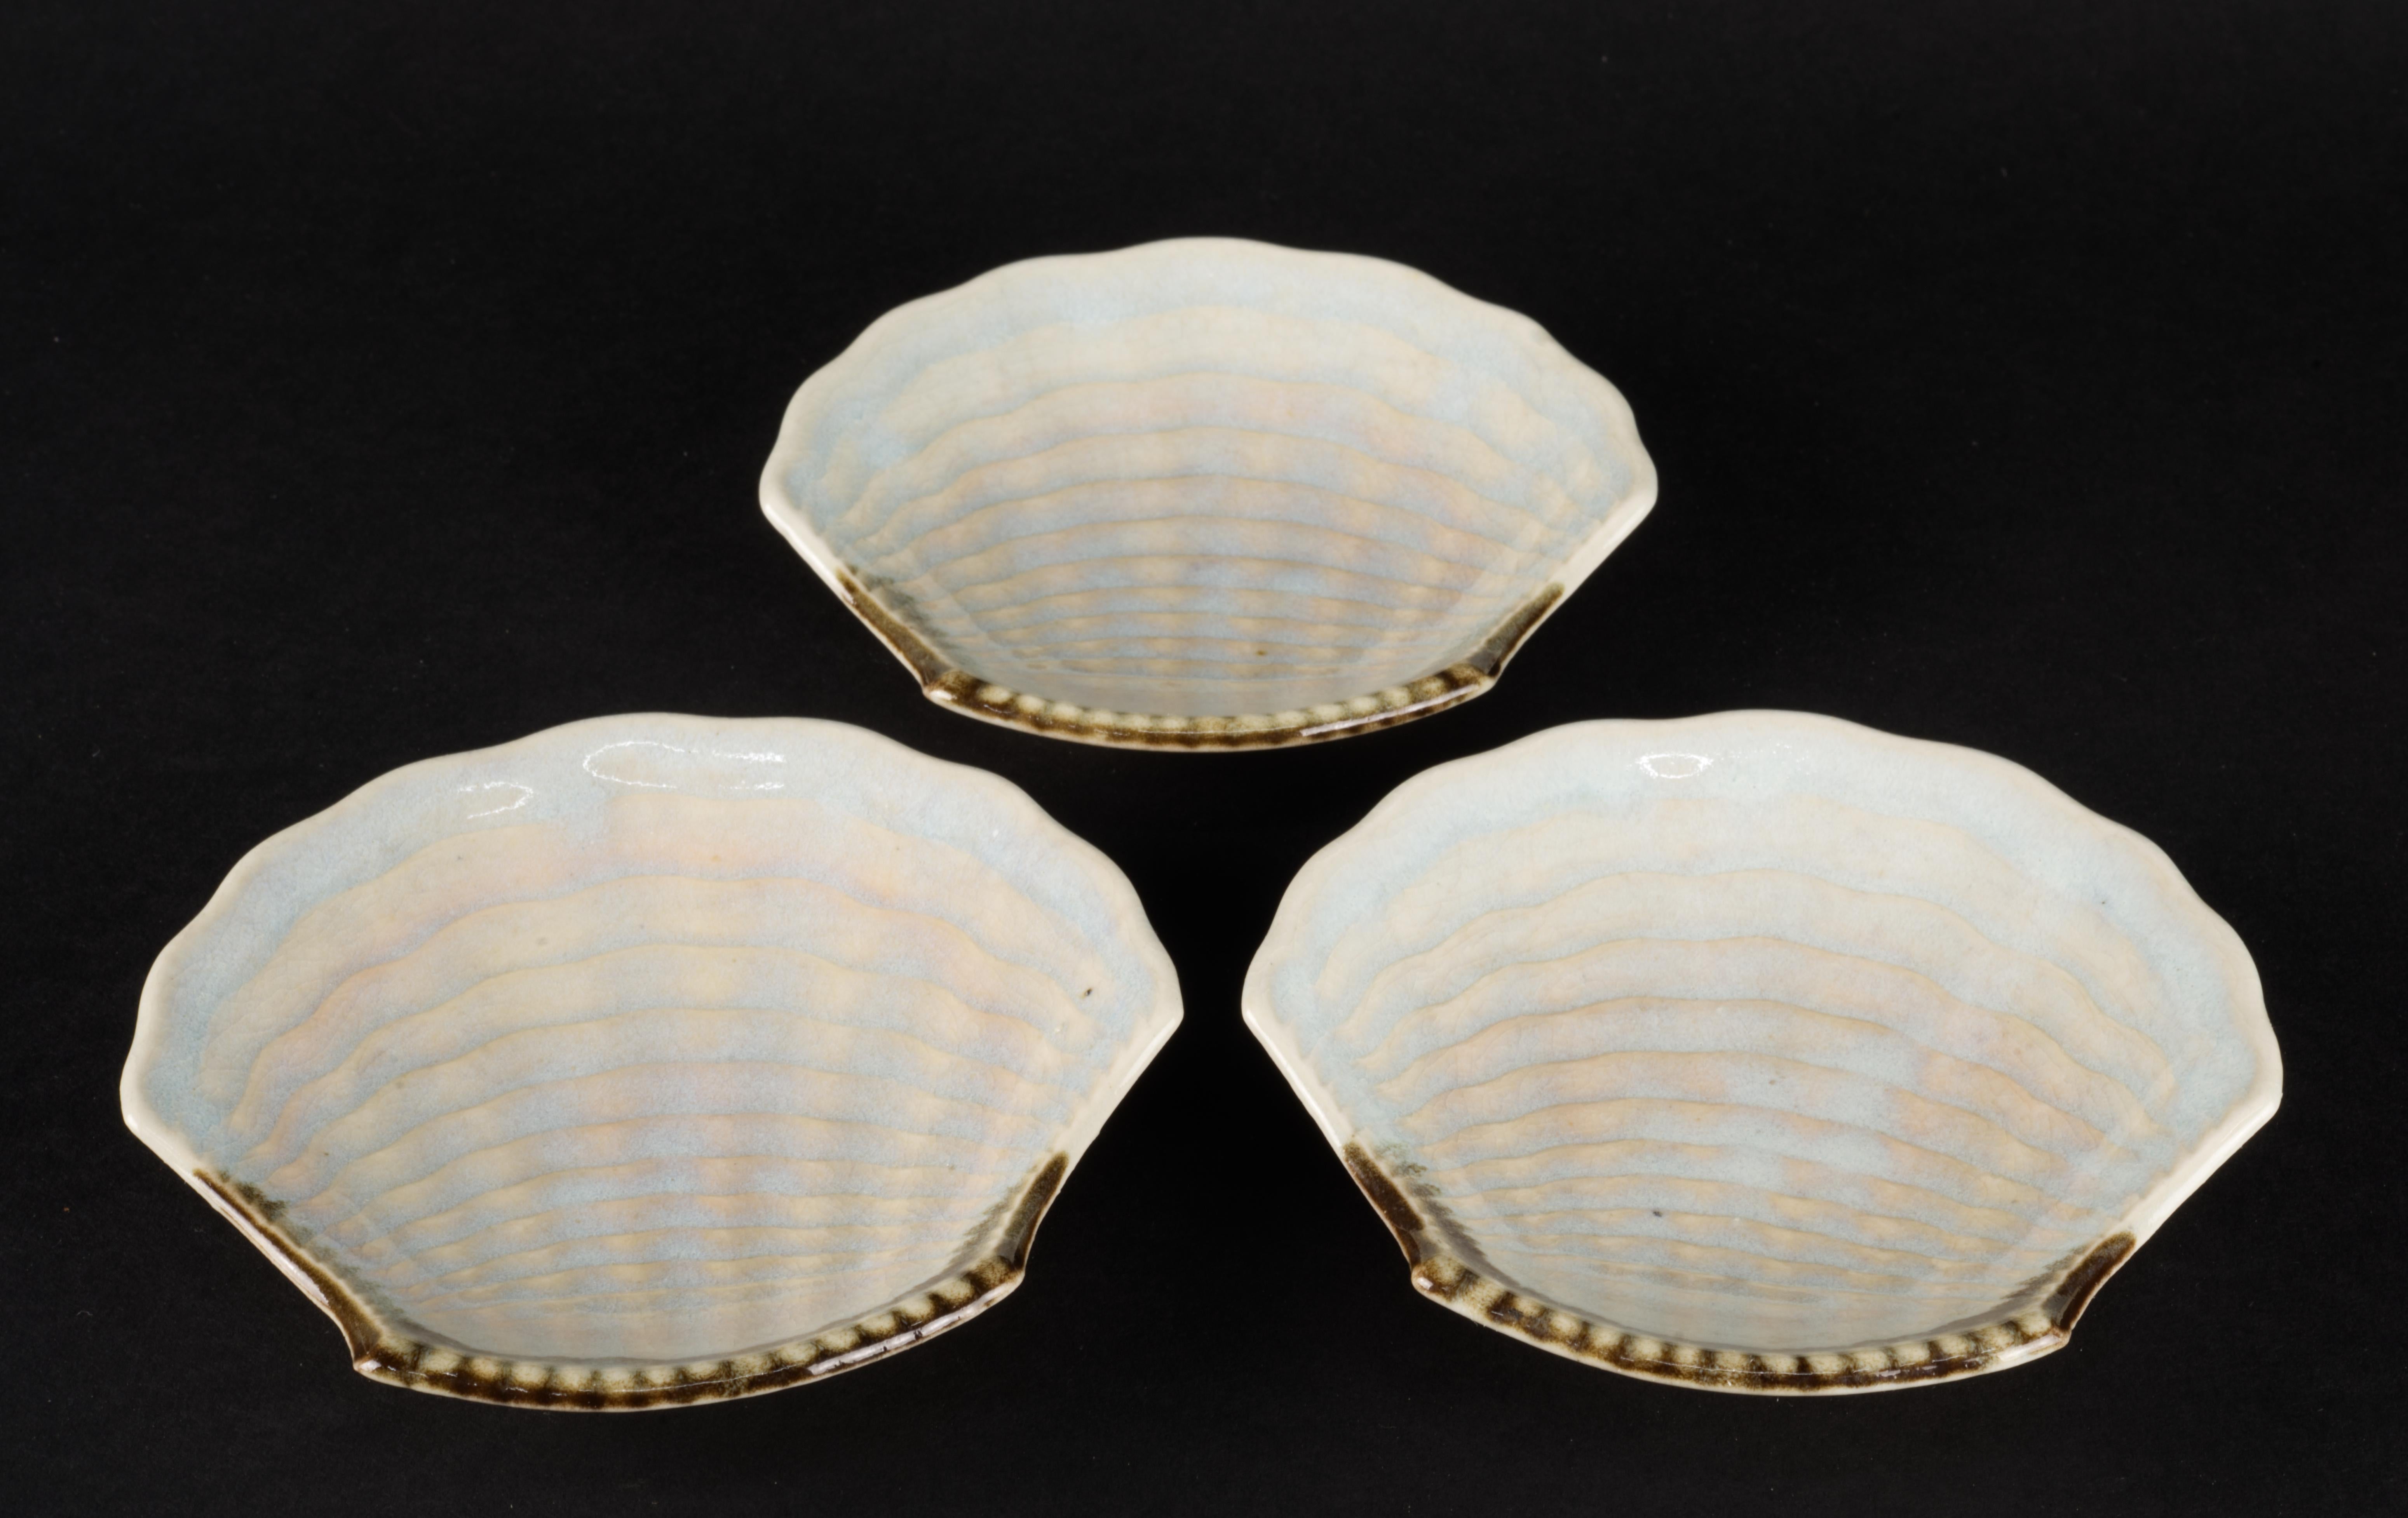 Set of 3 small shell shaped plates or bowls is hand decorated in crackled glaze in shades of blue and beige with asymmetric, earthy brown accent. Textured surfaces of the bowls are emphasized by creative use of colors in the glaze; calm, muted